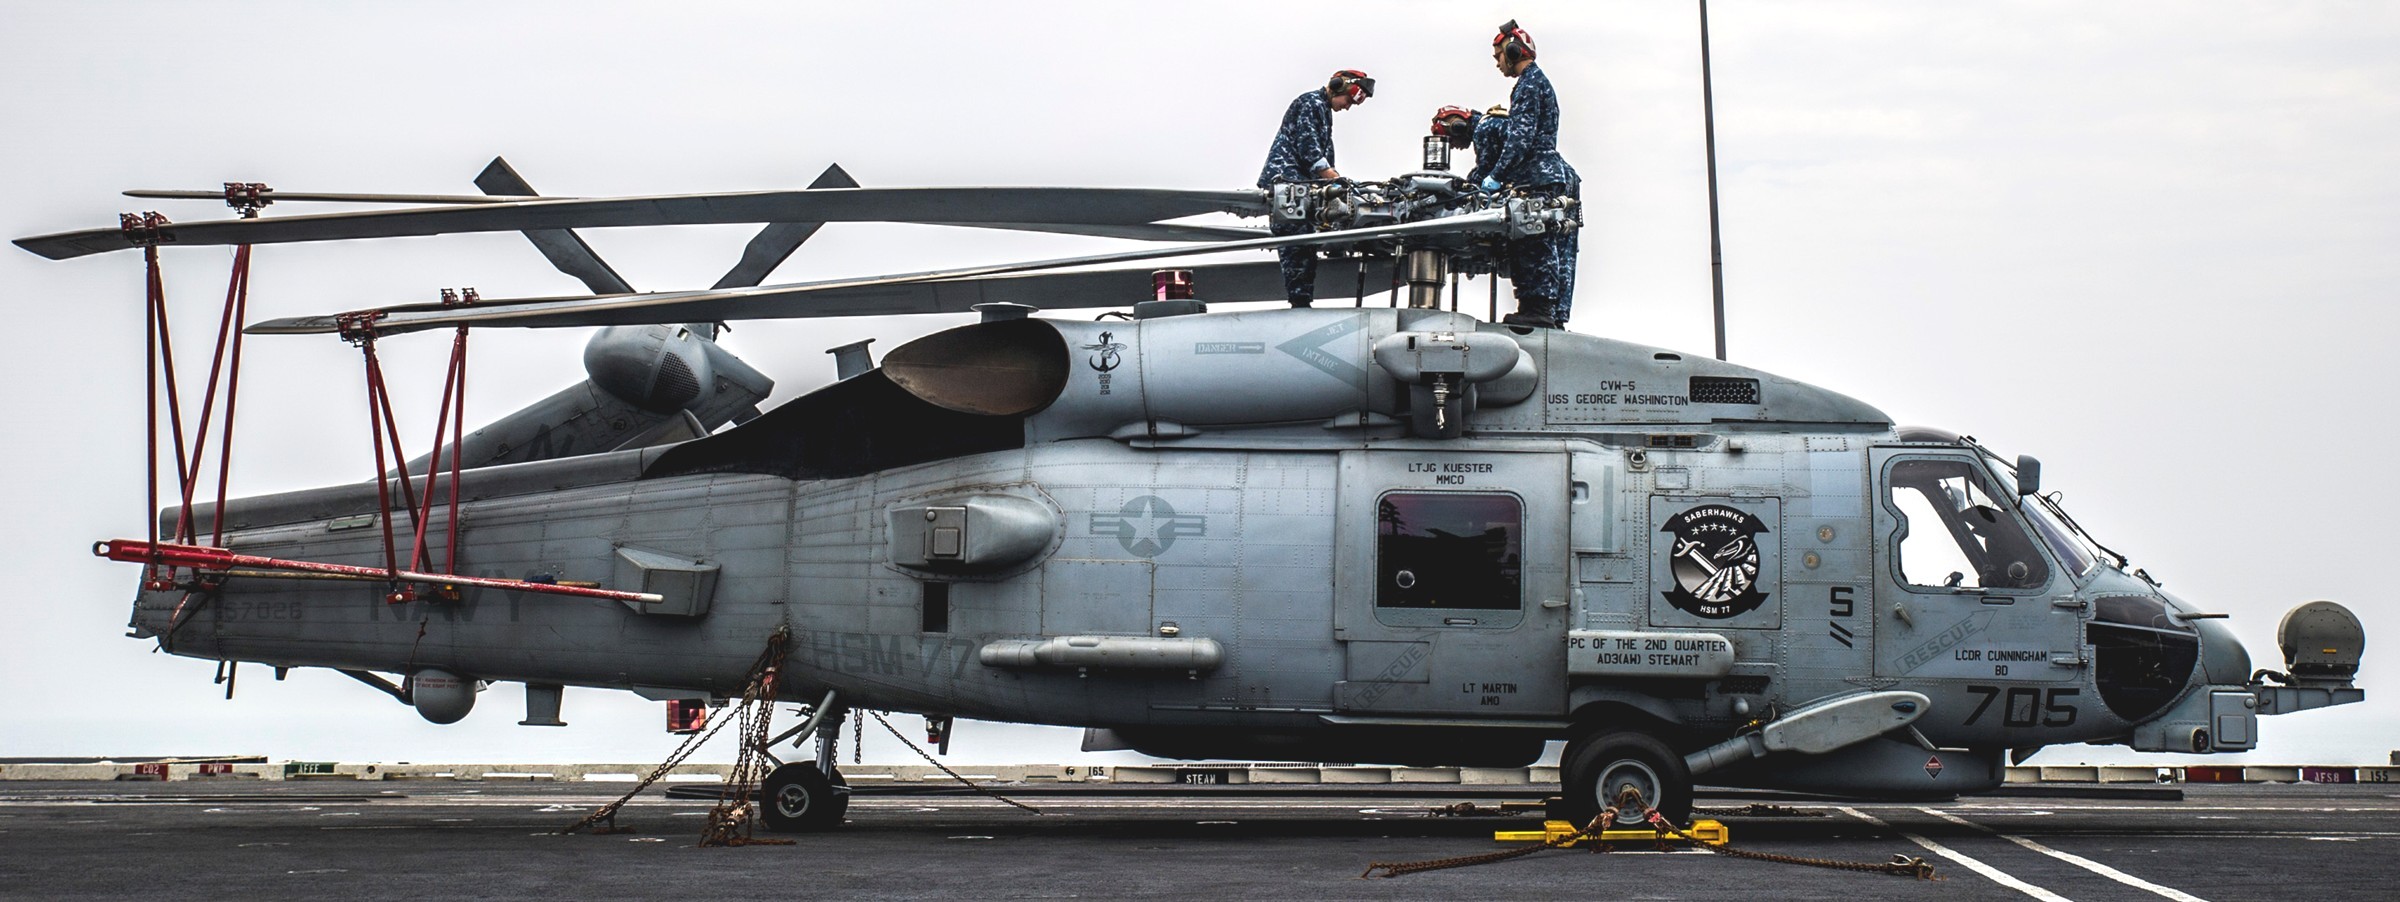 hsm-77 saberhawks helicopter maritime strike squadron us navy 2014 15